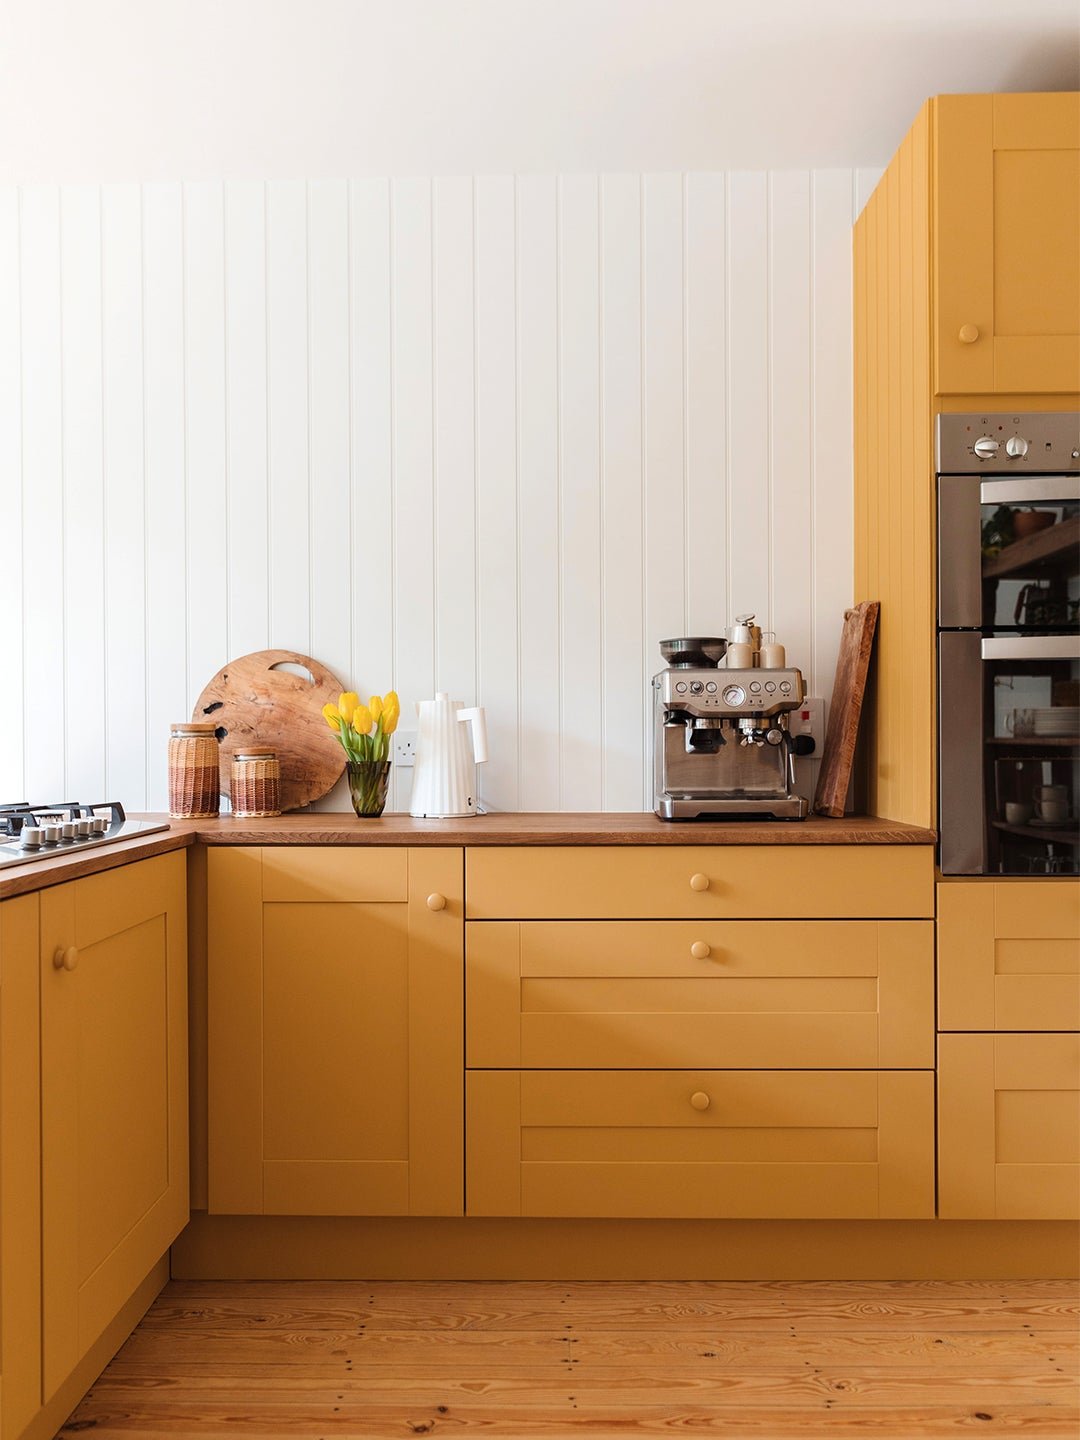 How This Londoner’s Weekend Kitchen Refresh Turned Into a 4-Month Renovation